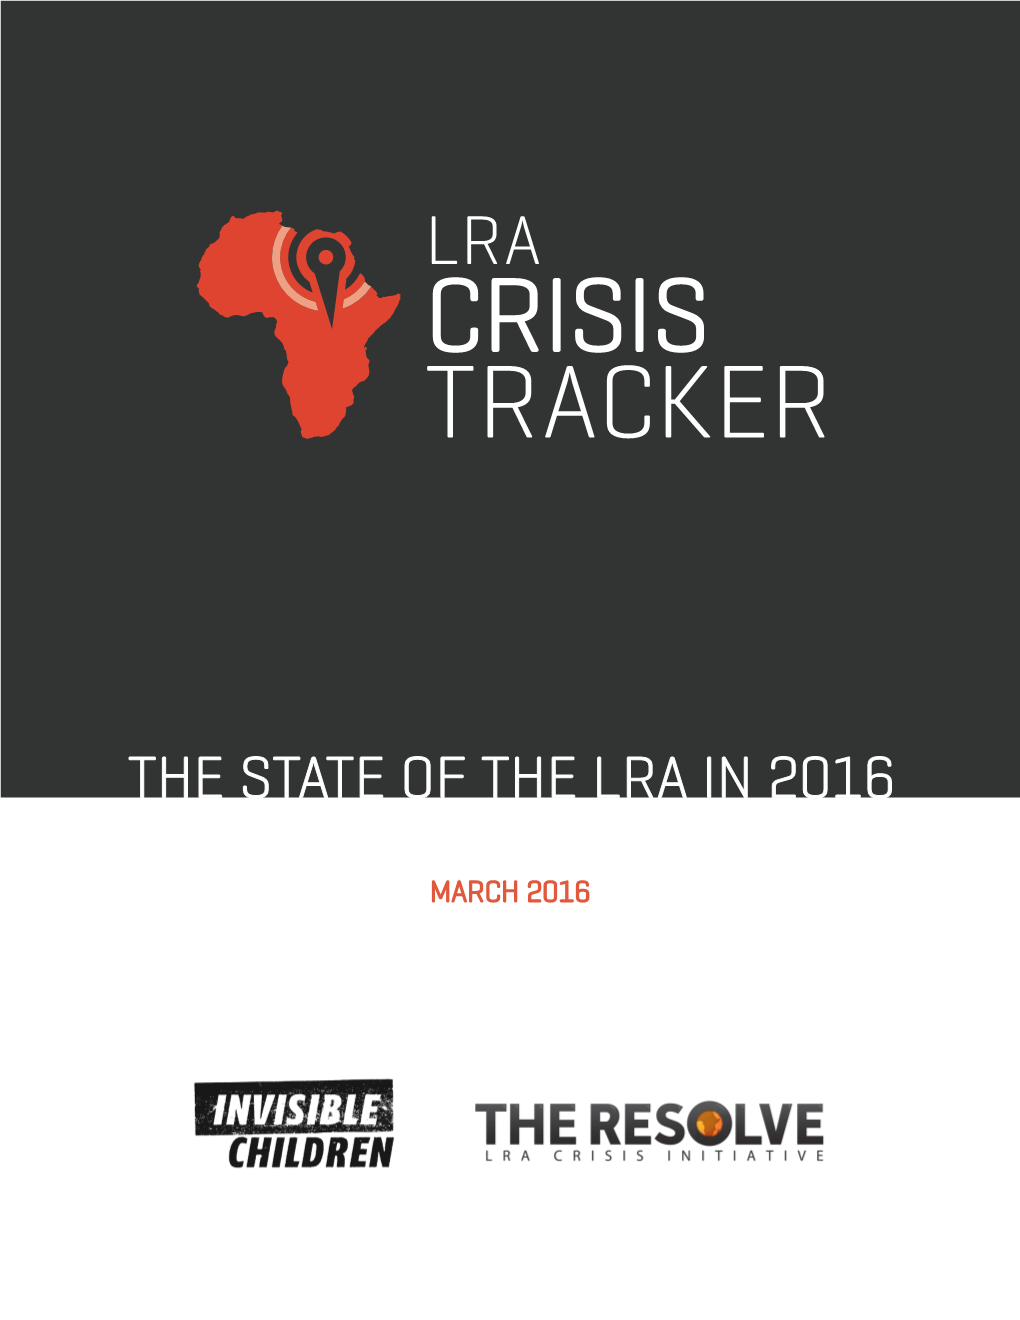 The State of the Lra in 2016